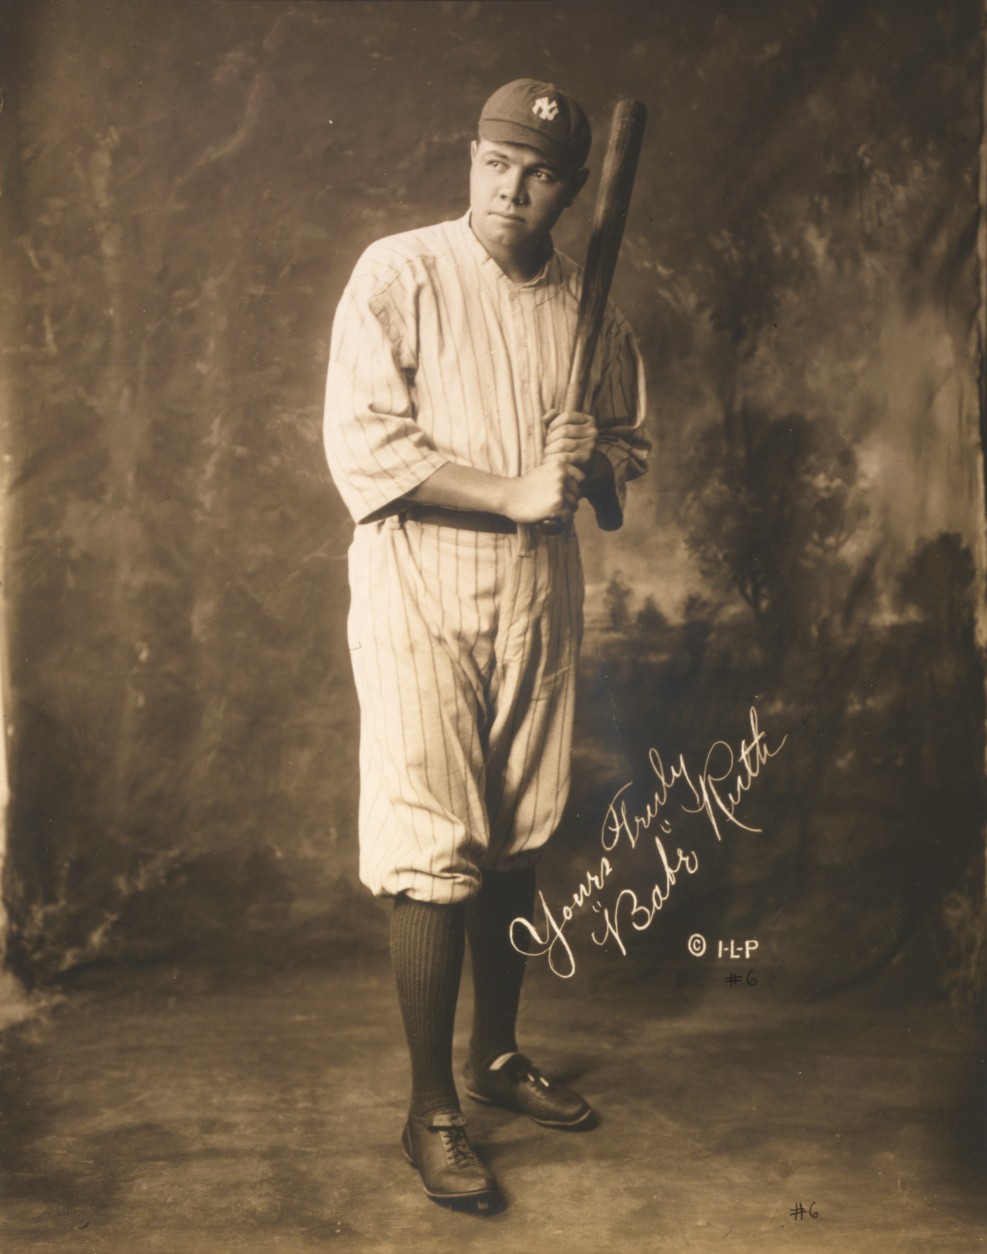 Babe Ruth in Yankee's Uniform by Irwin, La Broad, and Pudlin, 1920. (Courtesy Library of Congress)